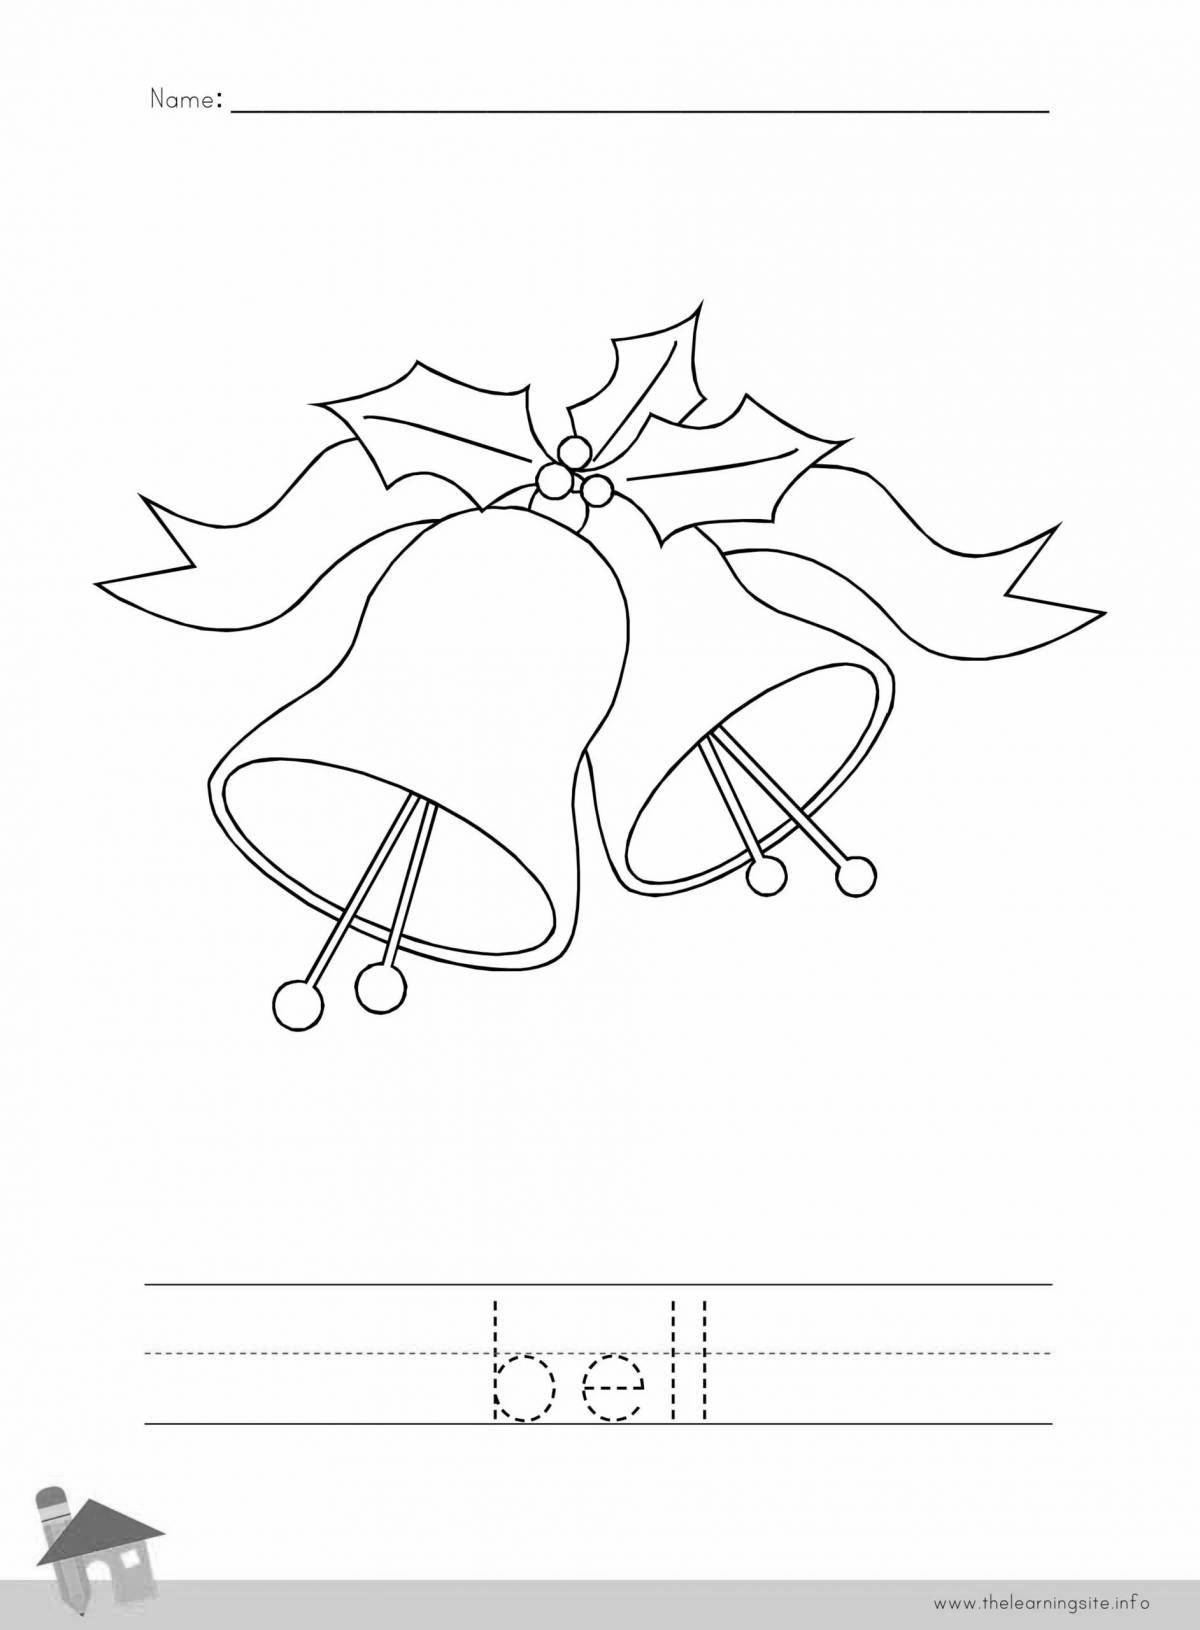 Jingle bells playful coloring page